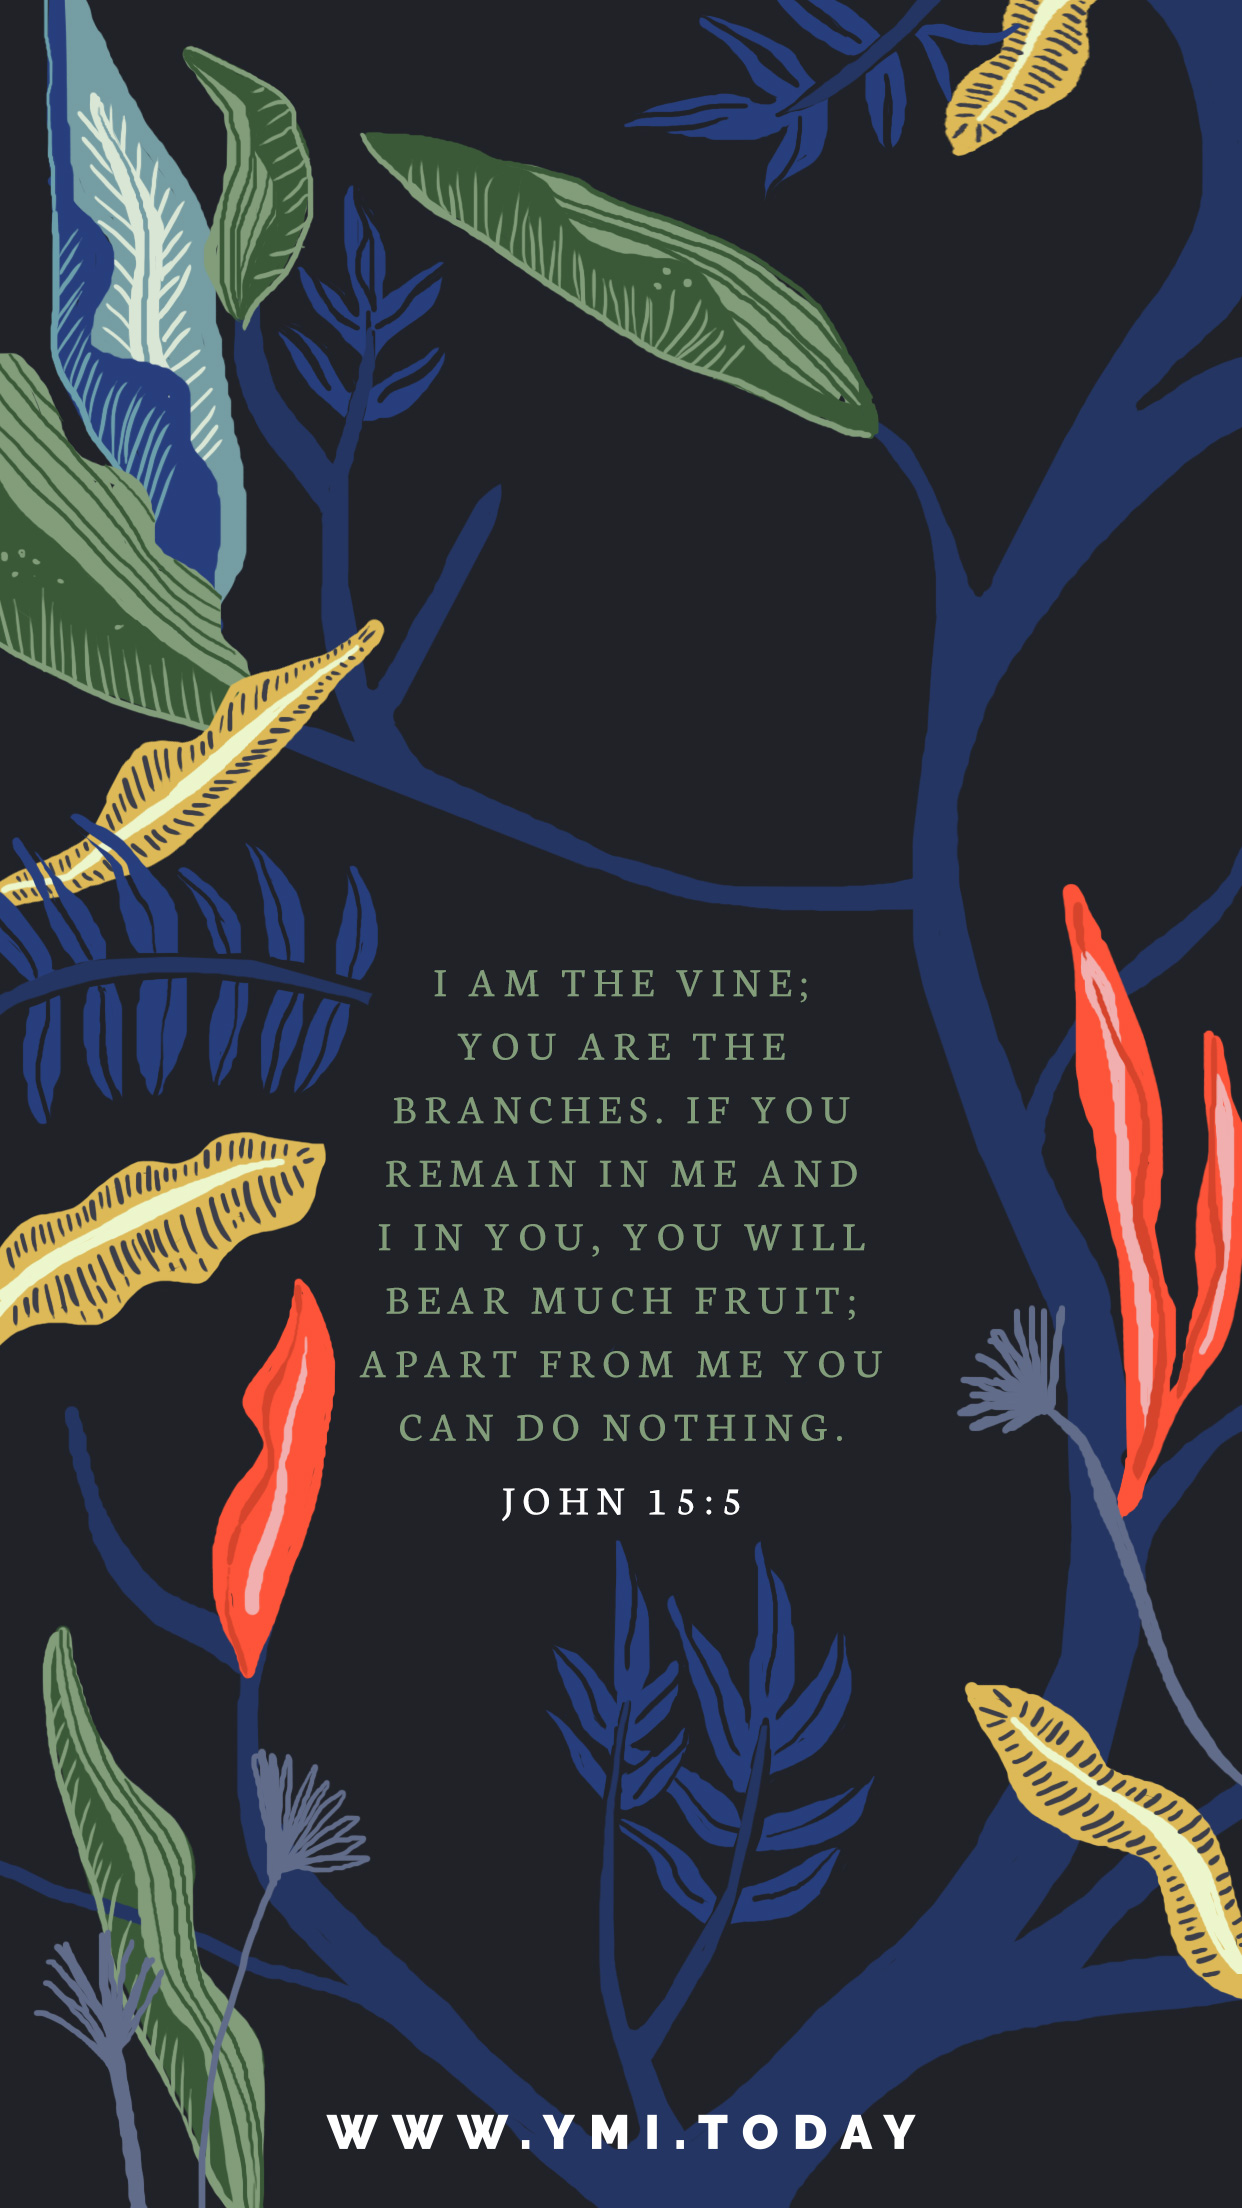 YMI March 2018 Phone Lockscreen - I am the vine; You are the branches. If you remain in Me and I in you, you will bear much fruit; Apart from Me you can do nothing. - John 15:5